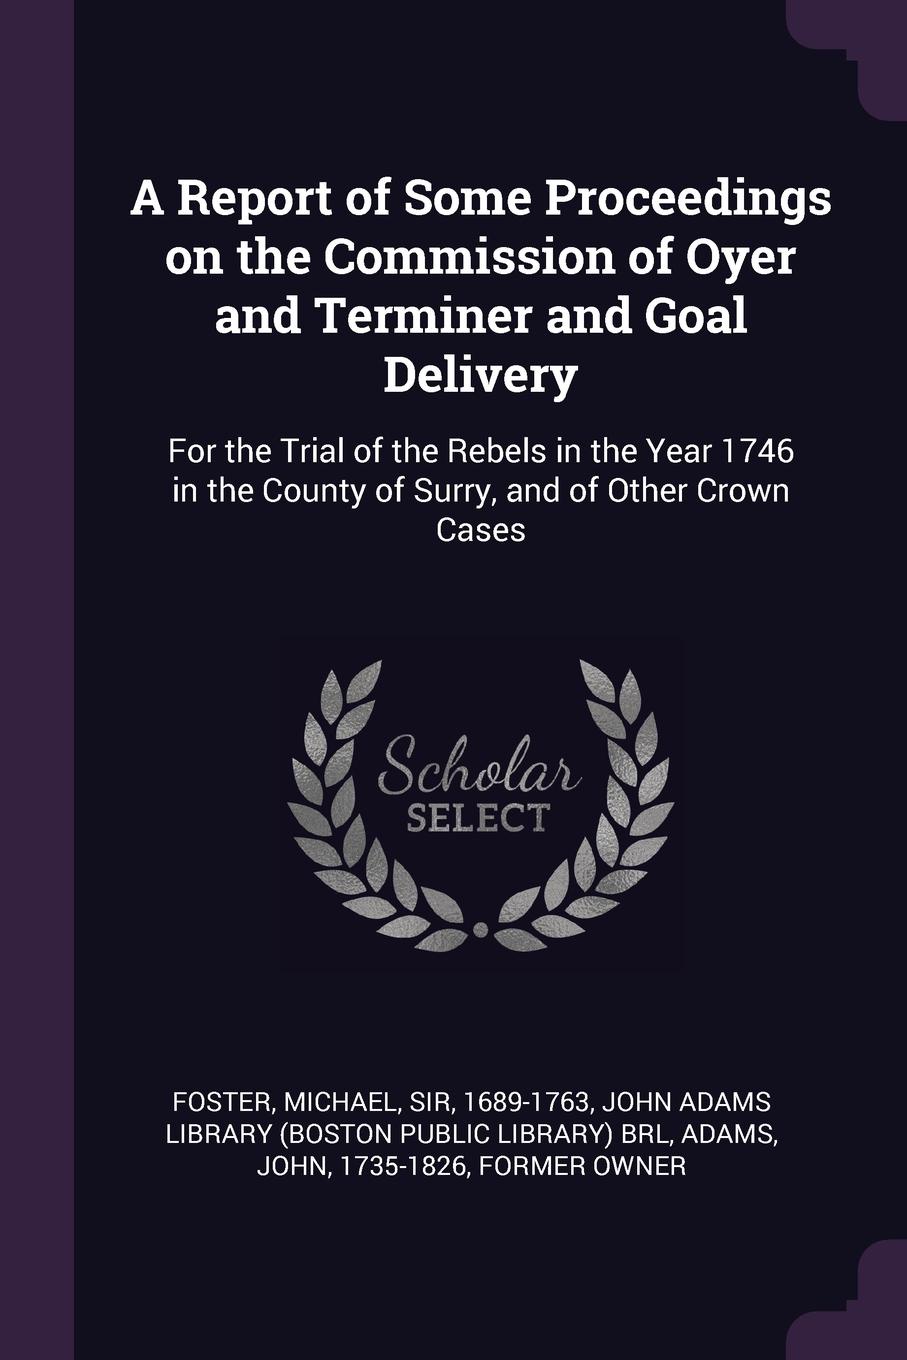 A Report of Some Proceedings on the Commission of Oyer and Terminer and Goal Delivery. For the Trial of the Rebels in the Year 1746 in the County of Surry, and of Other Crown Cases